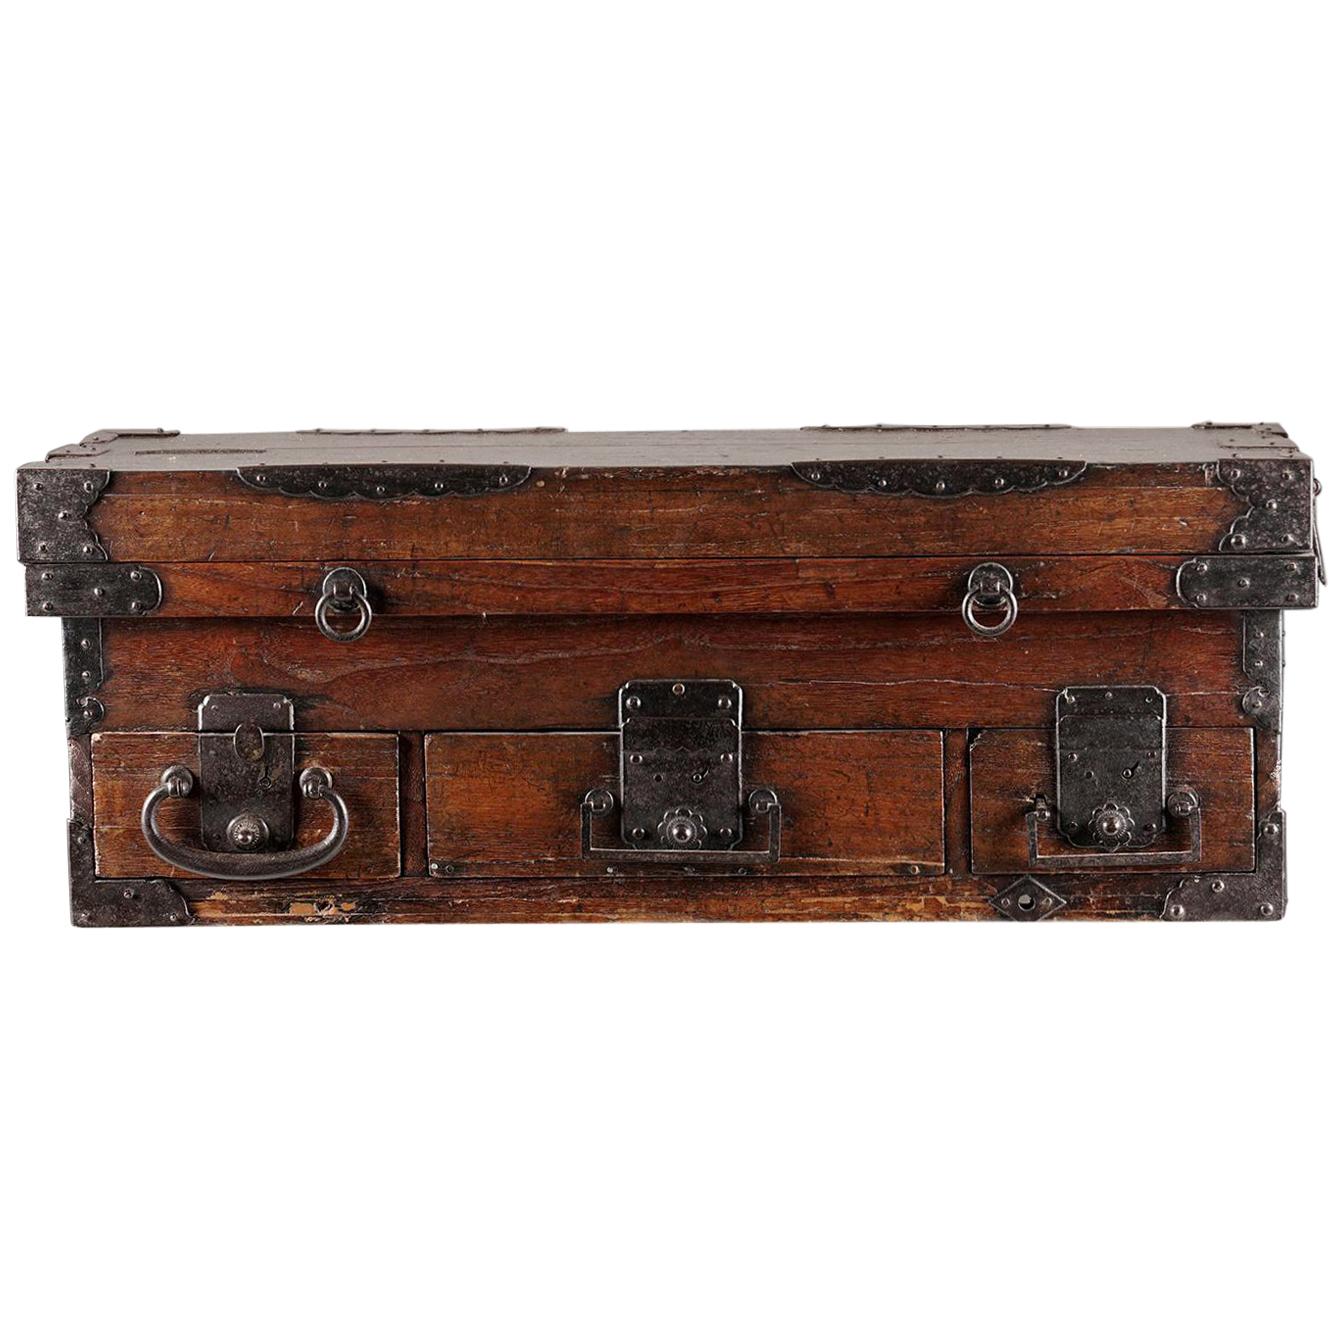 Rare Inscribed Japanese Wood Chest Zenibako on Custom Stand For Sale